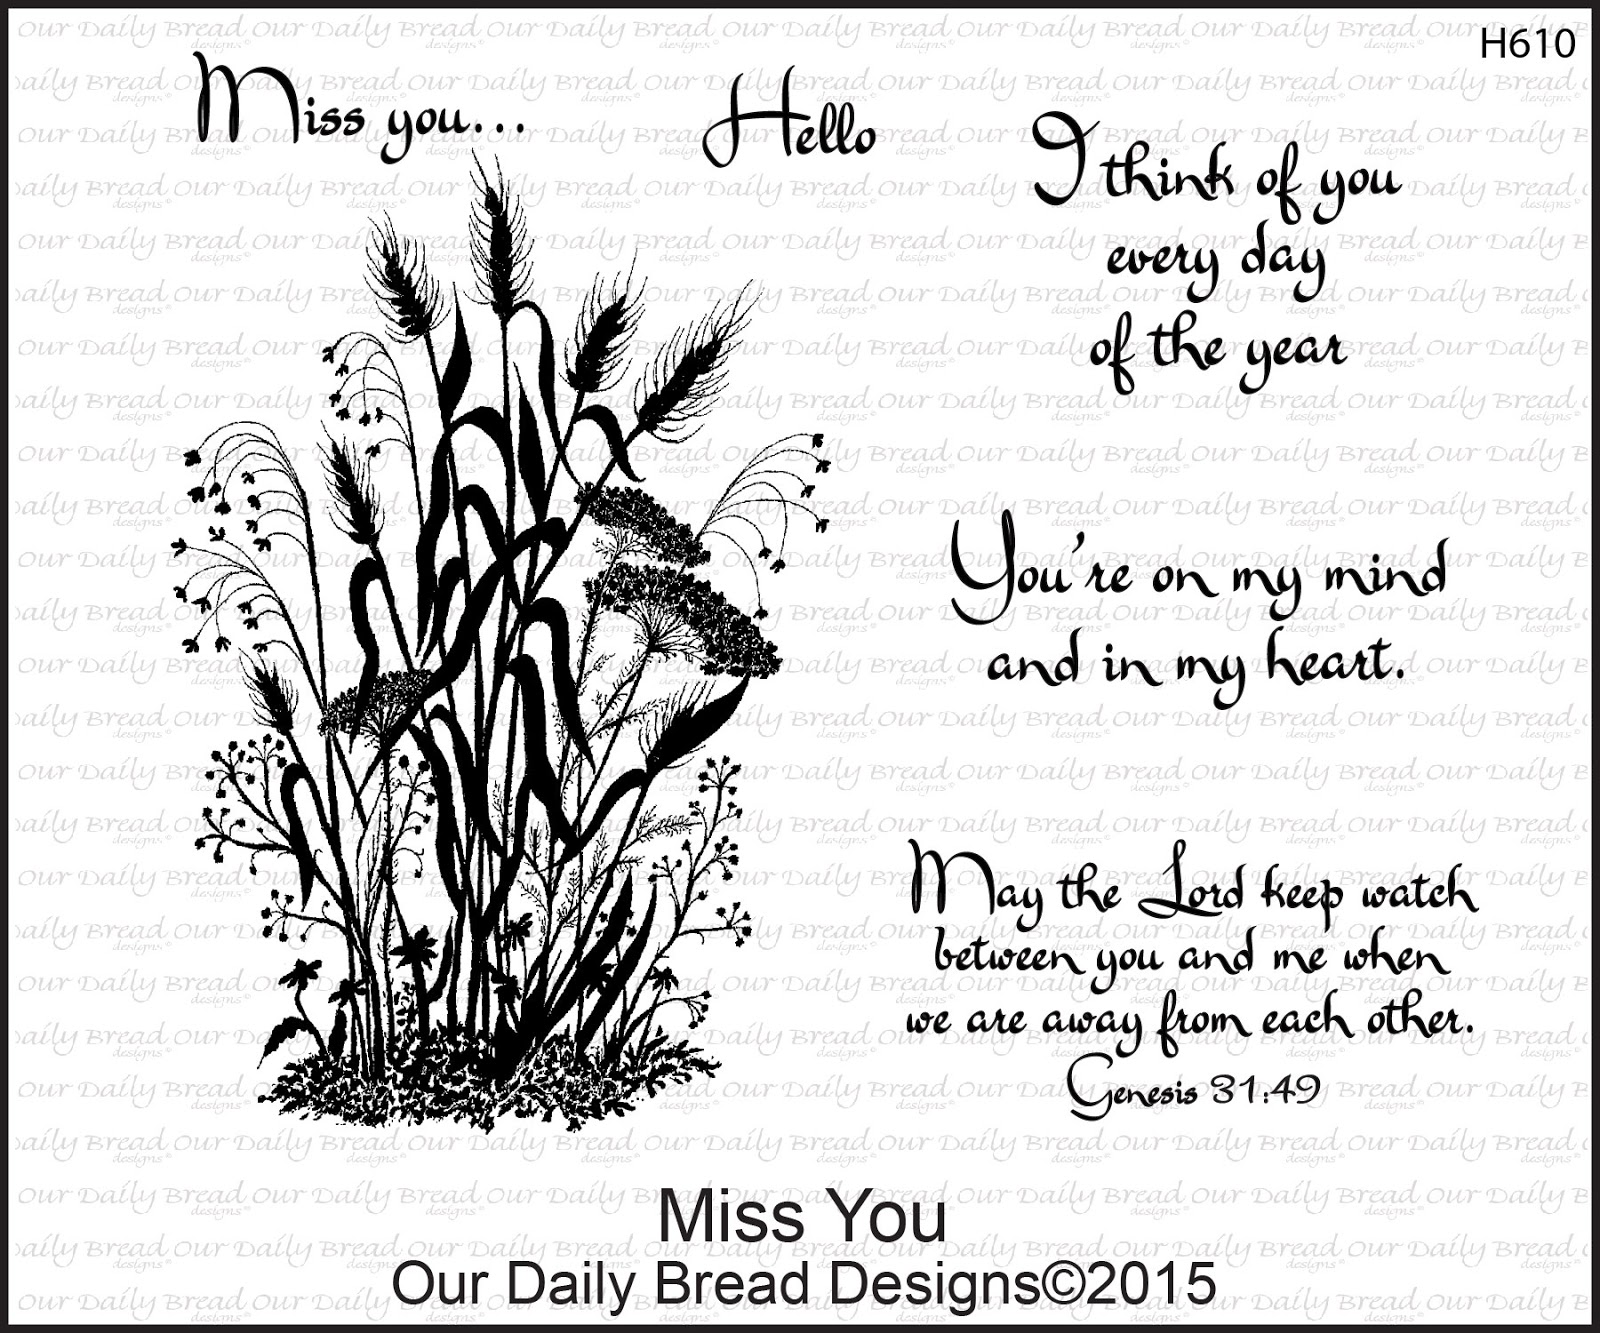 https://www.ourdailybreaddesigns.com/index.php/h610-miss-you.html